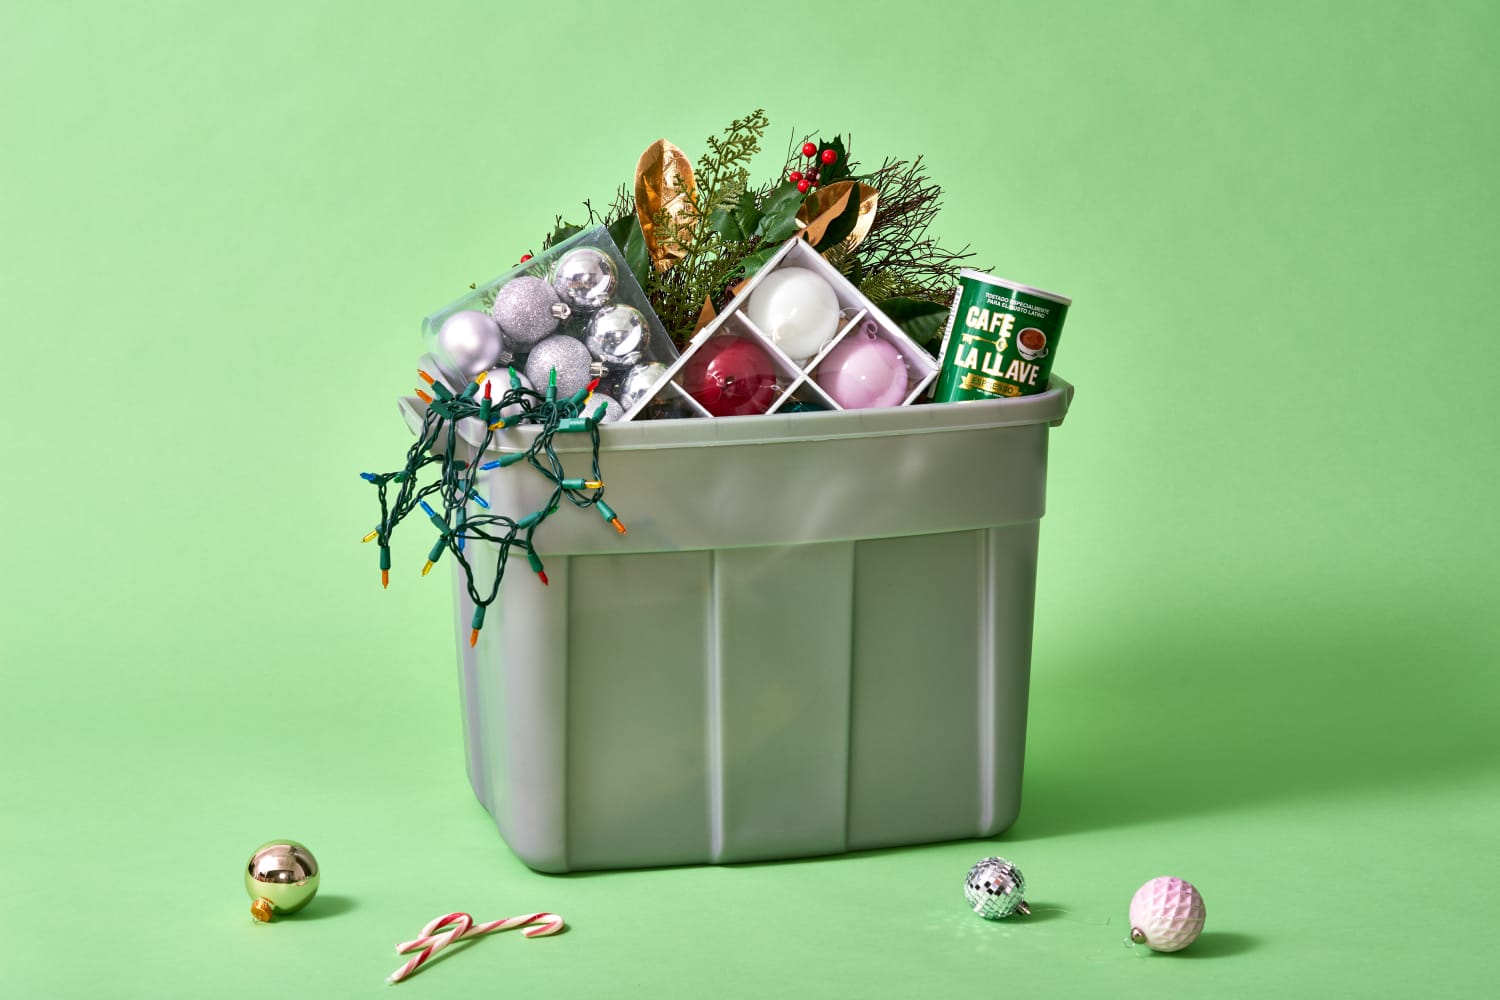 Save on Limited Time Originals Holiday Storage Containers & Lids